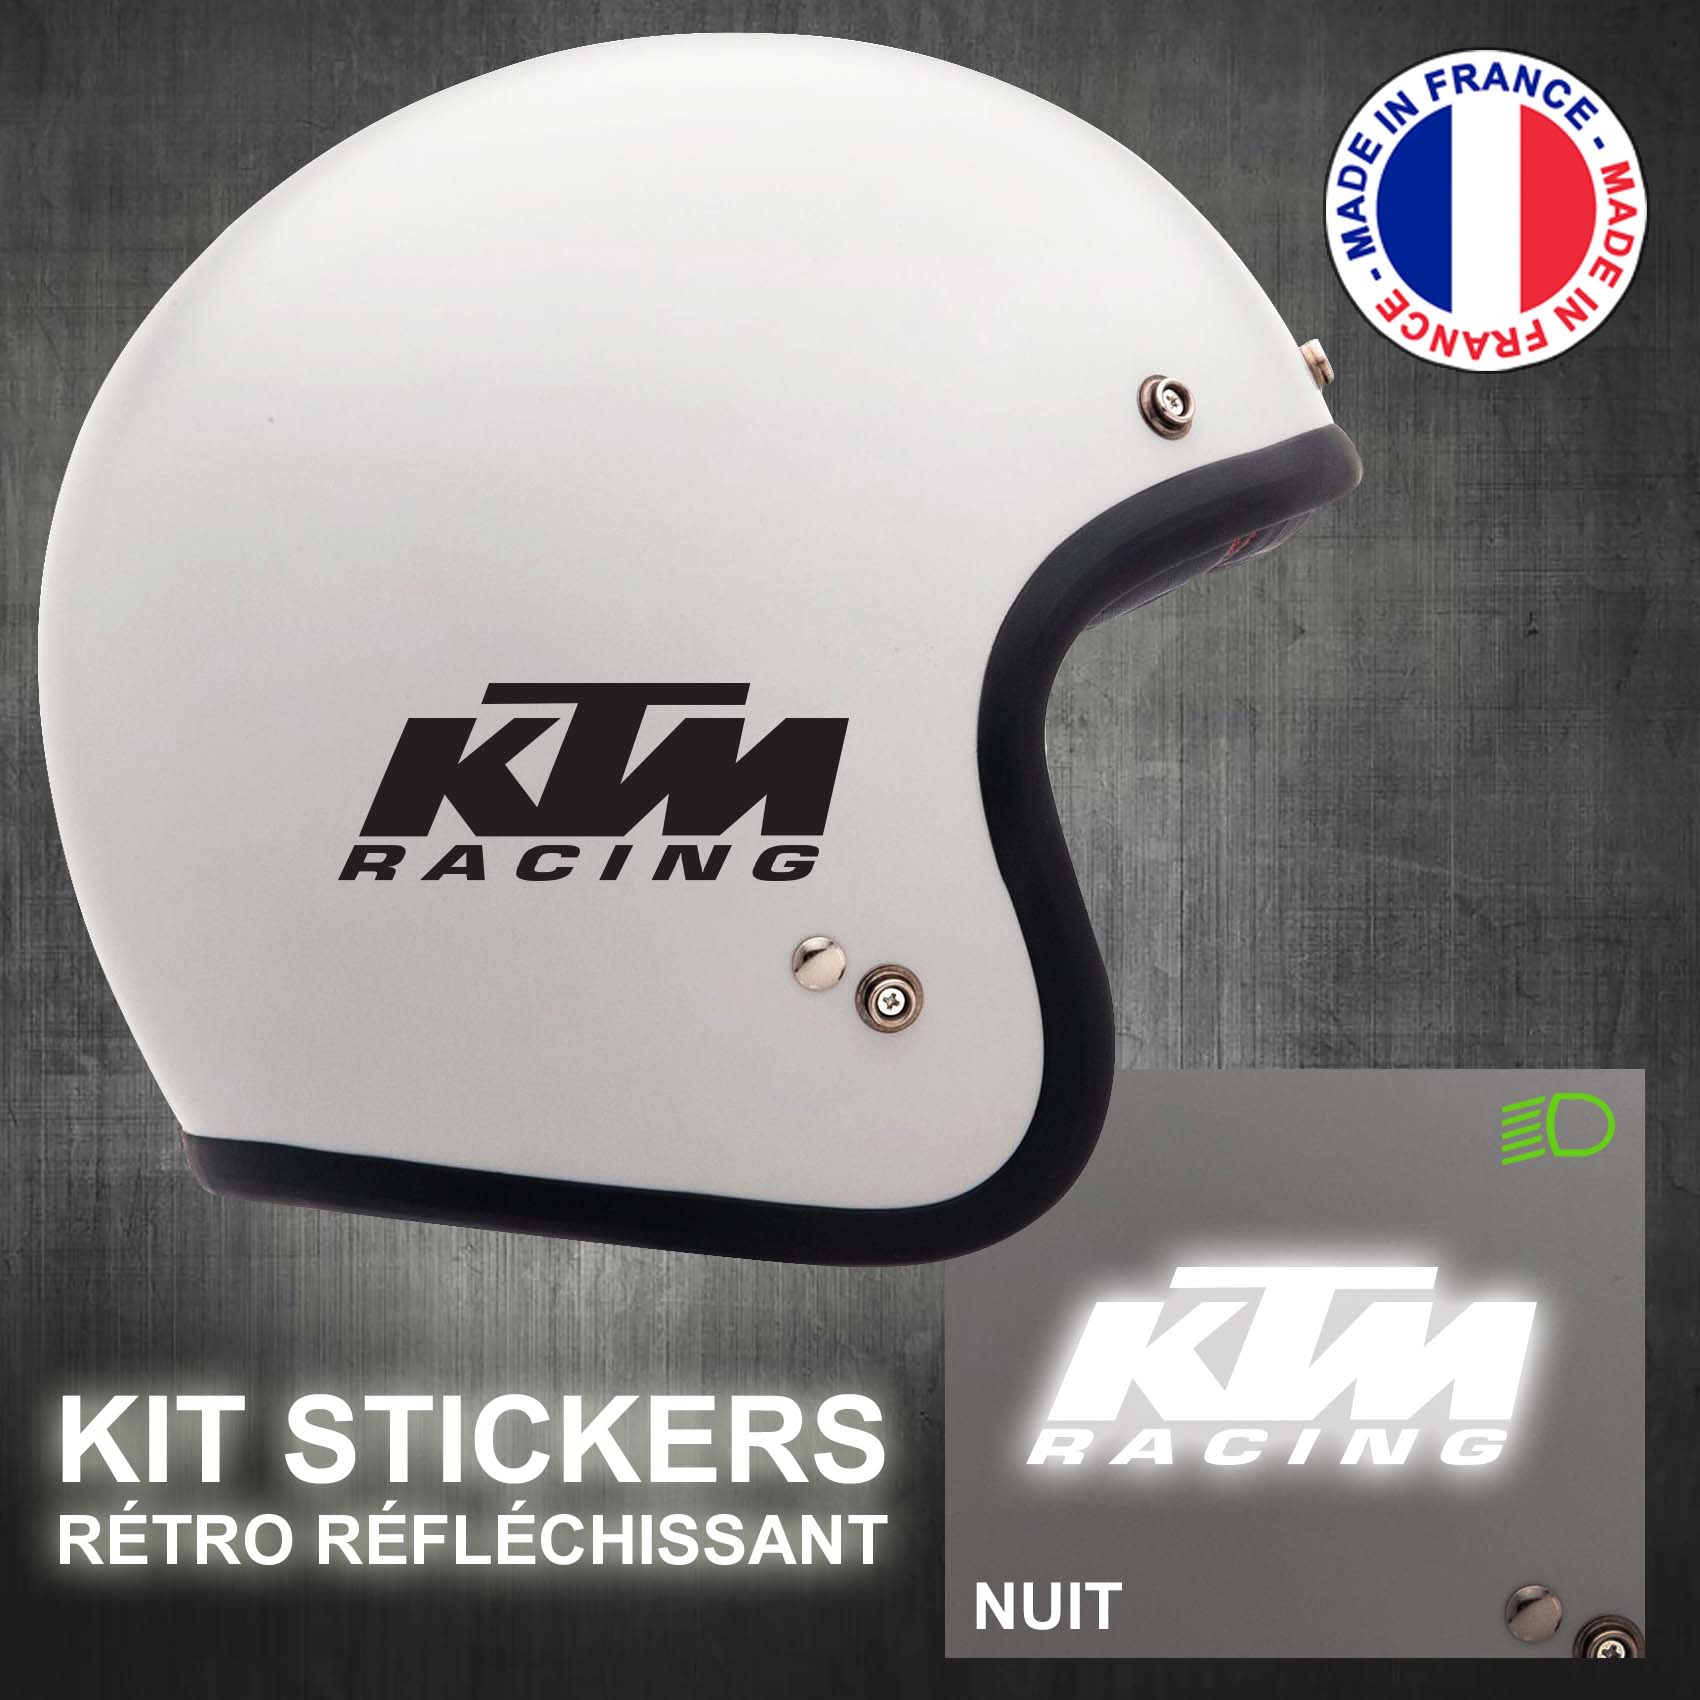 stickers-casque-moto-ktm-racing-ref2-retro-reflechissant-autocollant-blanc-moto-velo-tuning-racing-route-sticker-casques-adhesif-scooter-nuit-securite-decals-personnalise-personnalisable-min